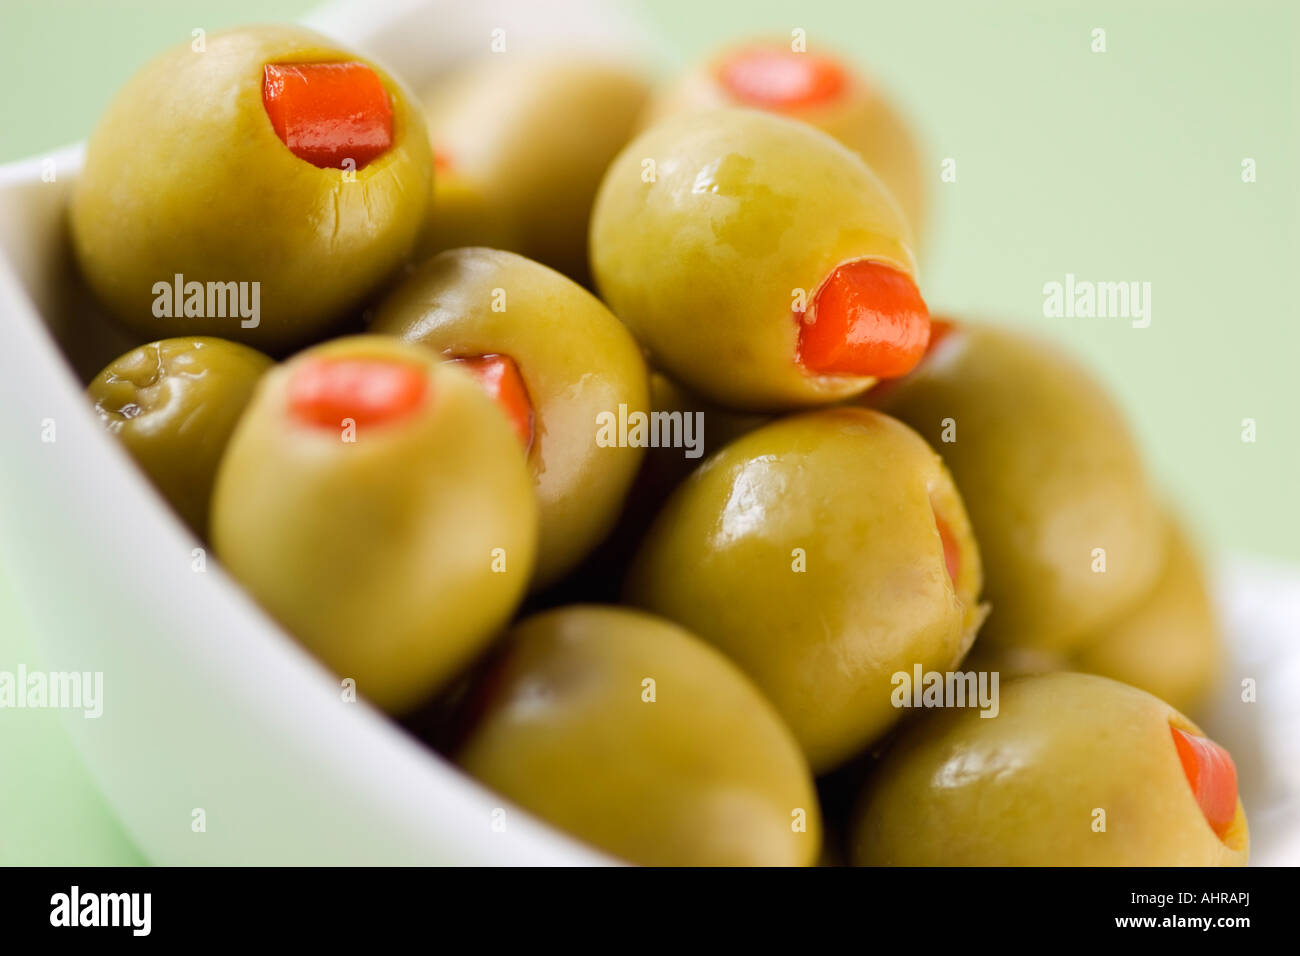 Green olives in white bowl close-up Food still life Stock Photo